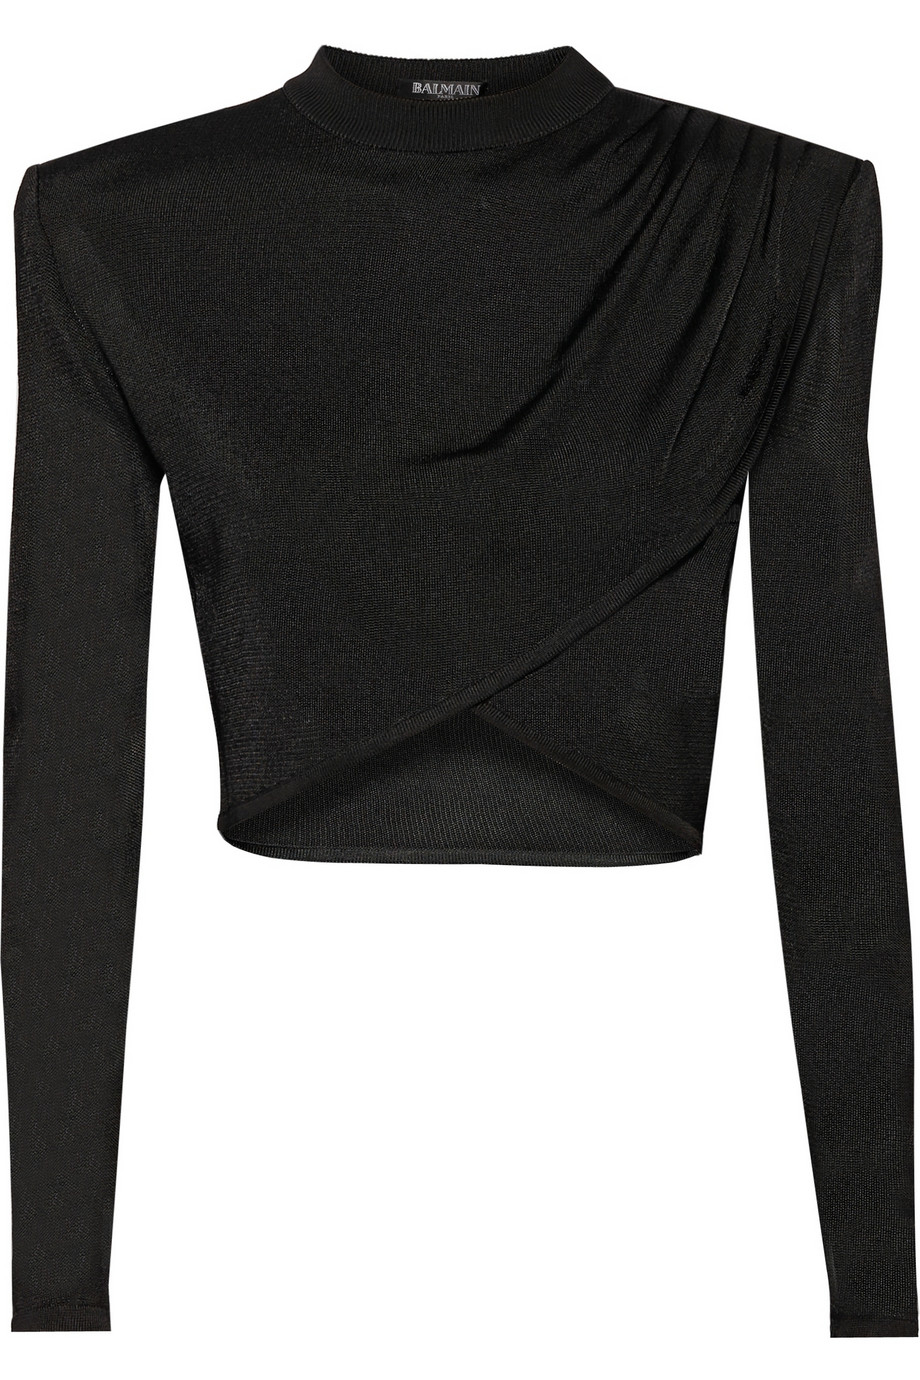 Lyst - Balmain Cropped Knitted Top in Black